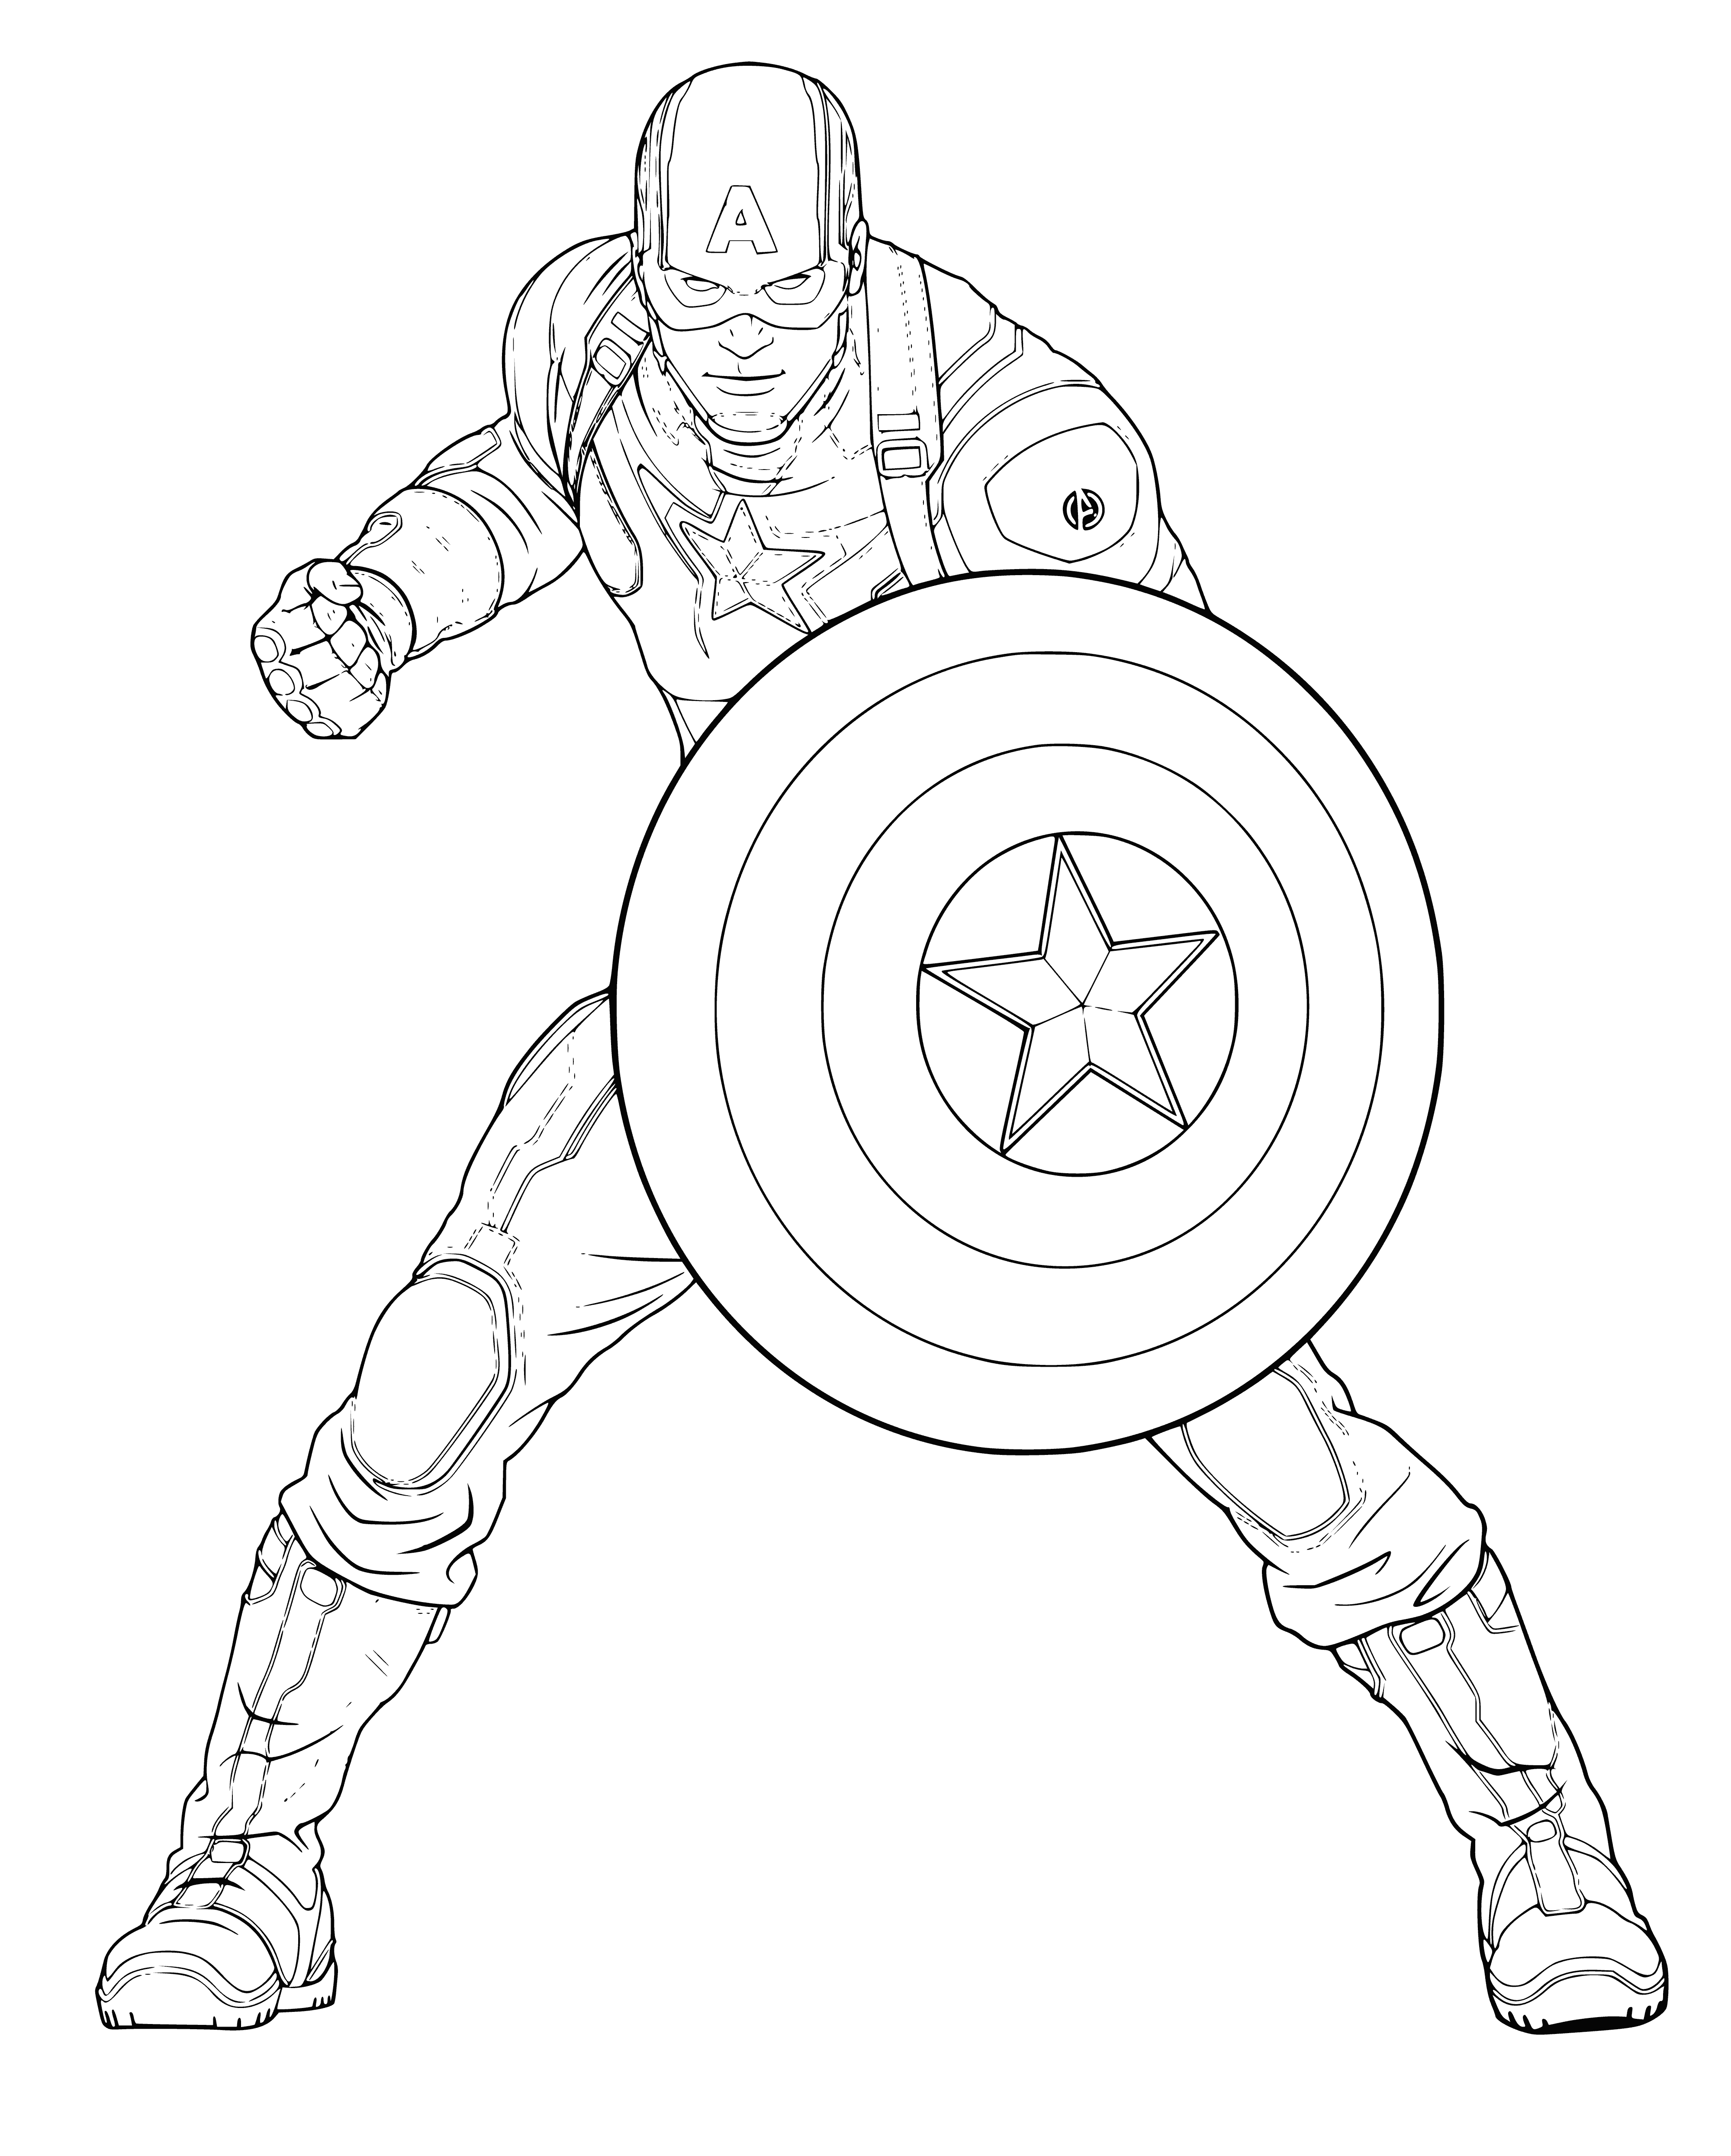 coloring page: Captain America in a star-spangled suit, red and white stripes, confident pose, with a large shield. Background: cloudy blue sky. #Marvel